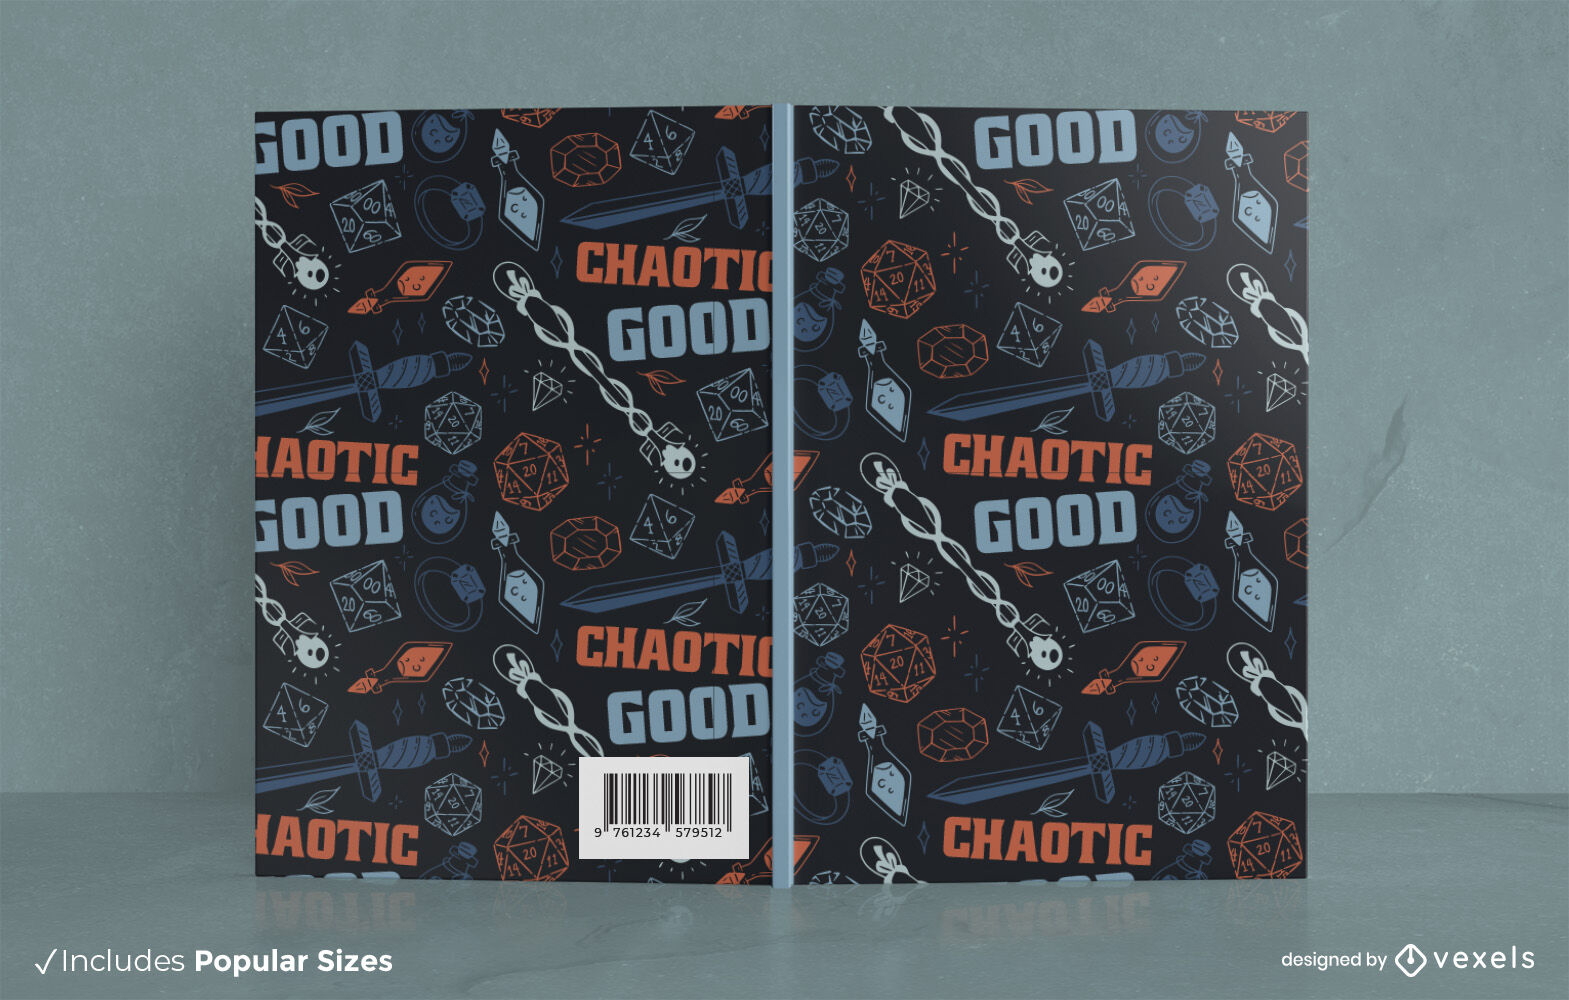 Chaotic good RPG pattern book cover design